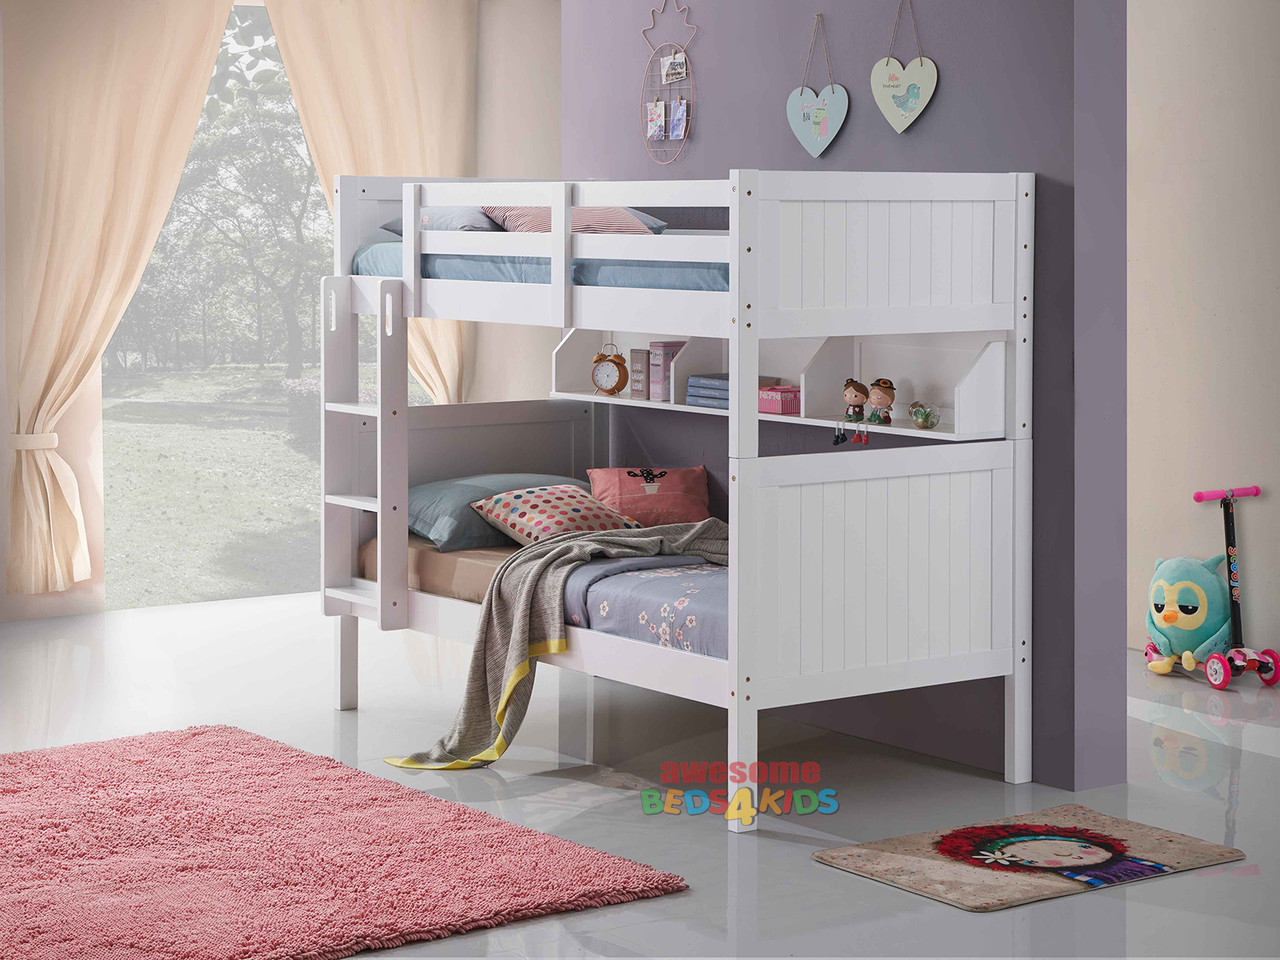 Regatta Single Bunk features a modern style bunk bed with an closed slated head and foot boards. Great shelf storage for the bottom bunk.